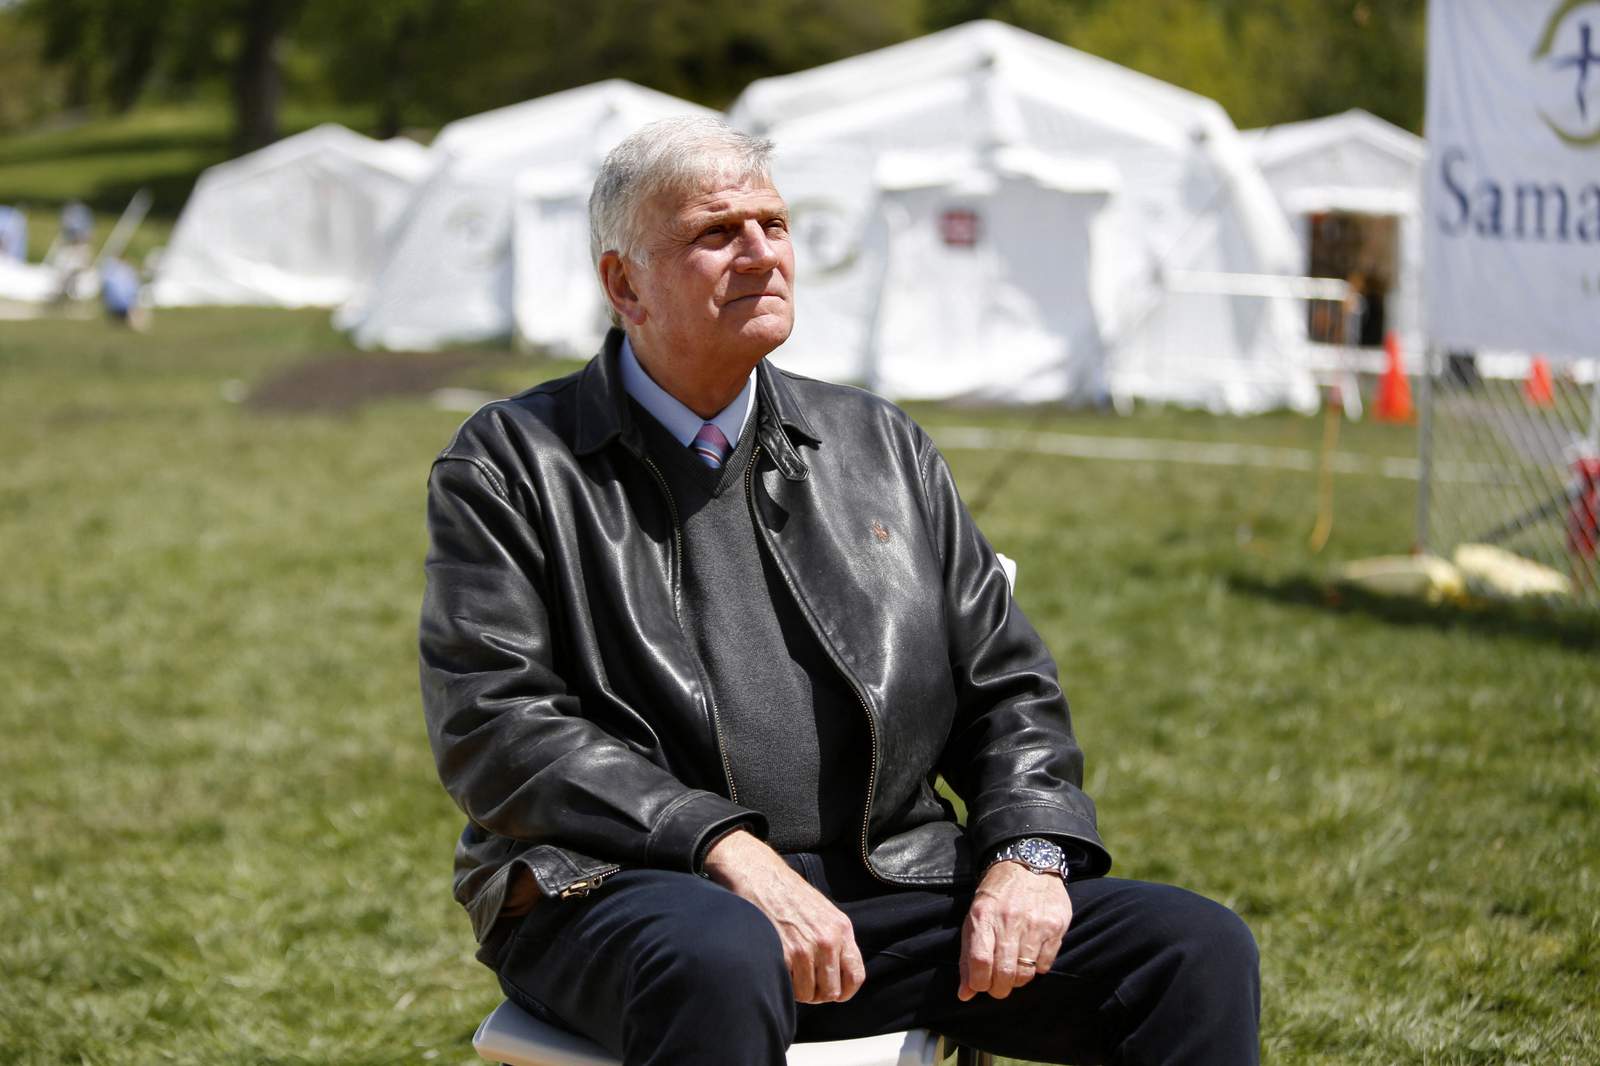 Franklin Graham: No interest in federal money meant for WHO